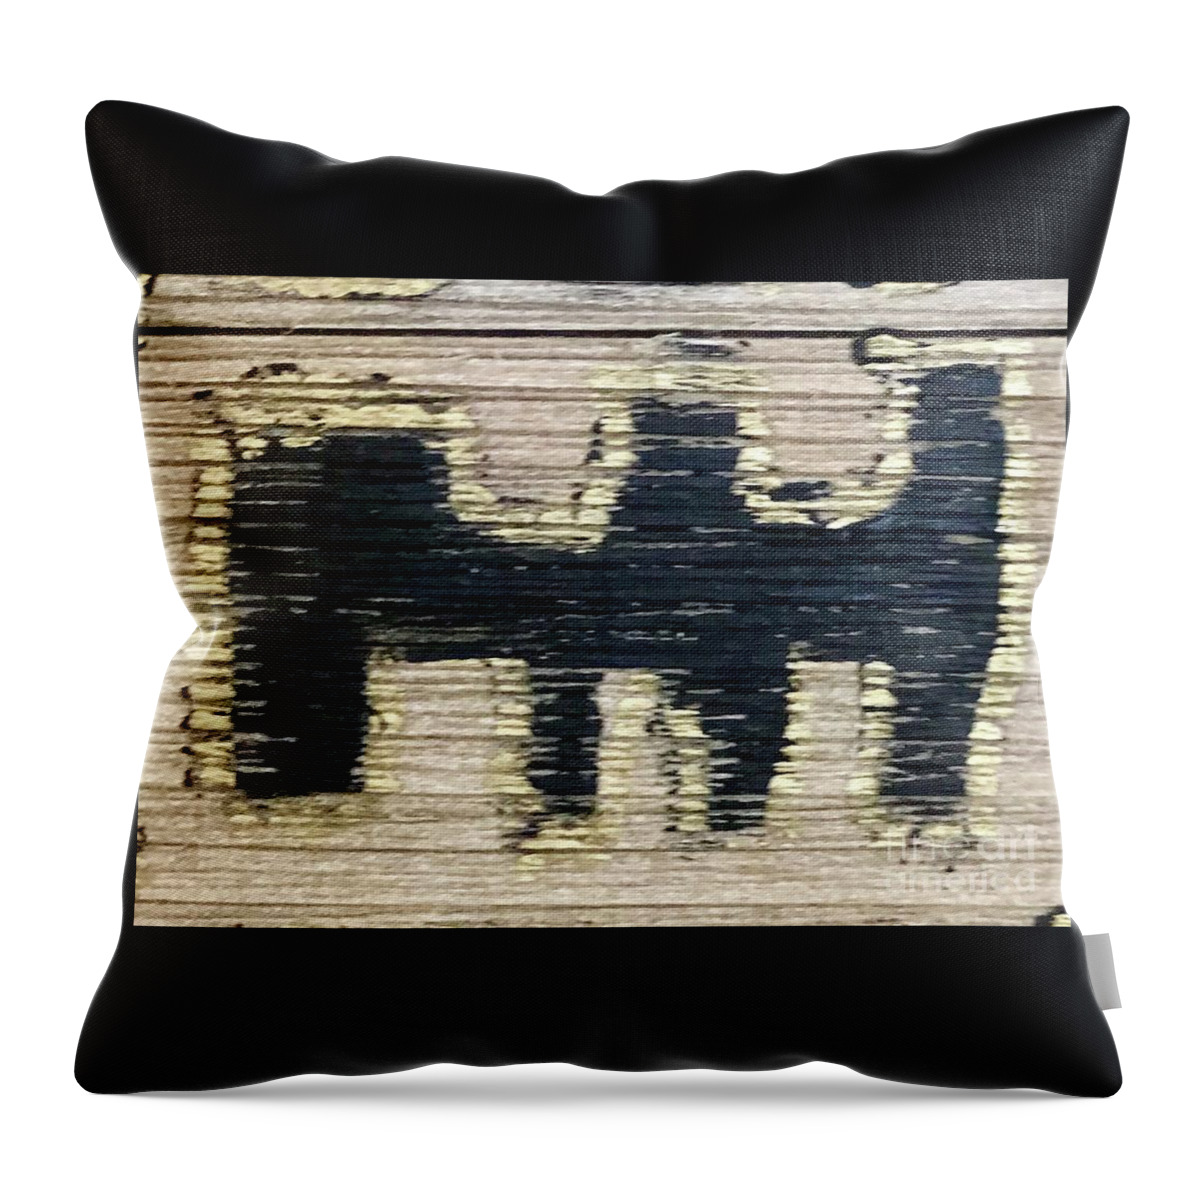 Abstract Organic Cultural Fantacy Throw Pillow featuring the painting Evolution 1 by Hila Abada